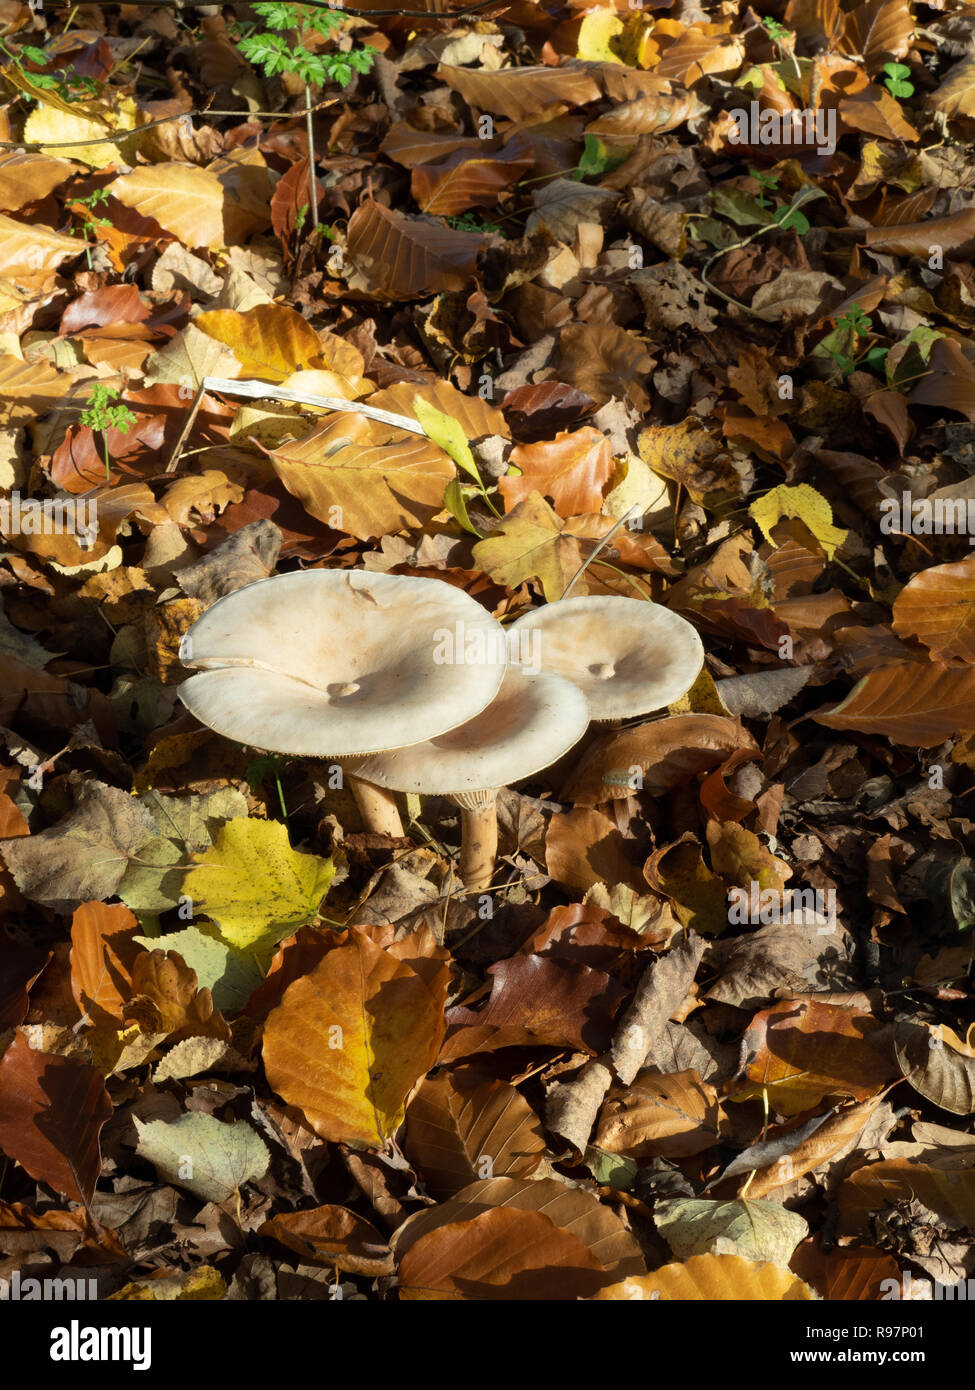 A group of three Common funnel mushrooms growing through fallen autumn leaves Stock Photo